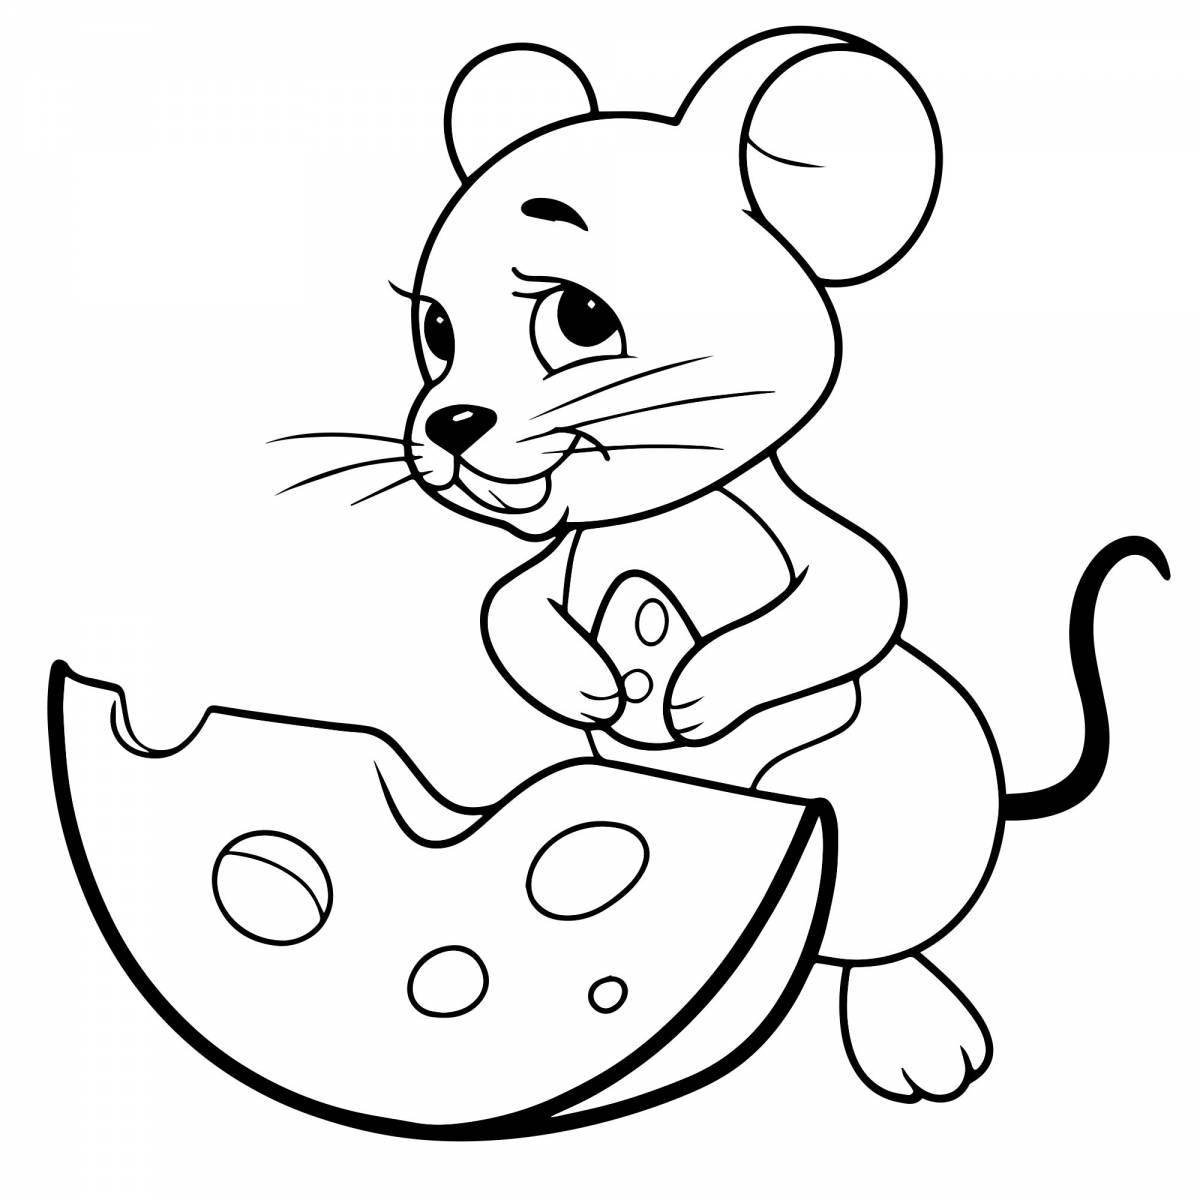 Fun mouse coloring for kids